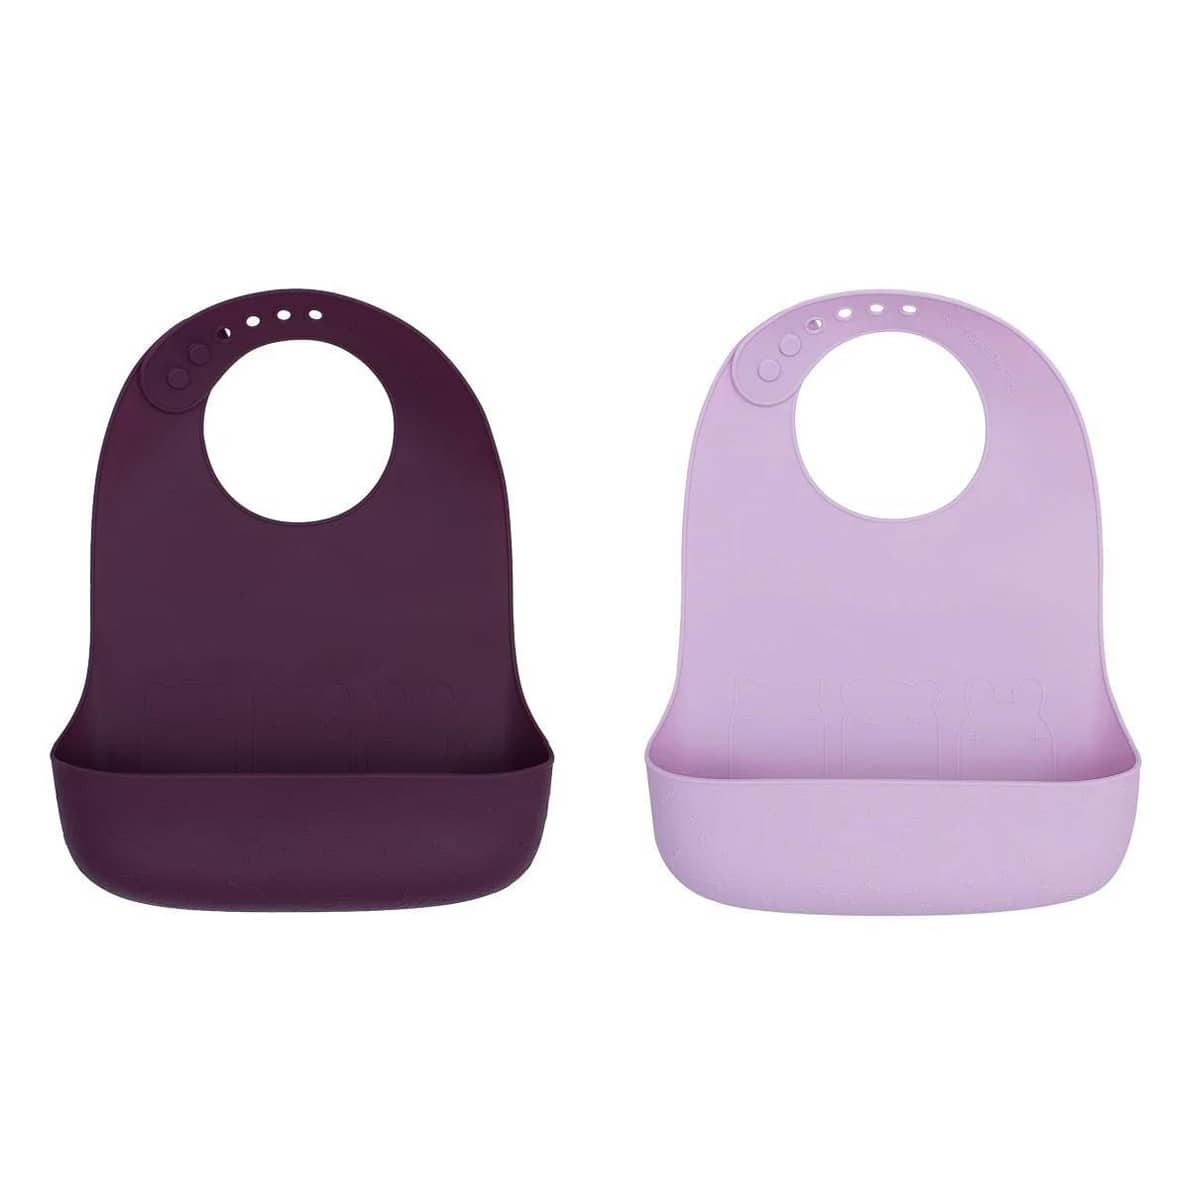 We Might Be Tiny Silicone Catchie Bibs 2.0 - Plum/Lilac